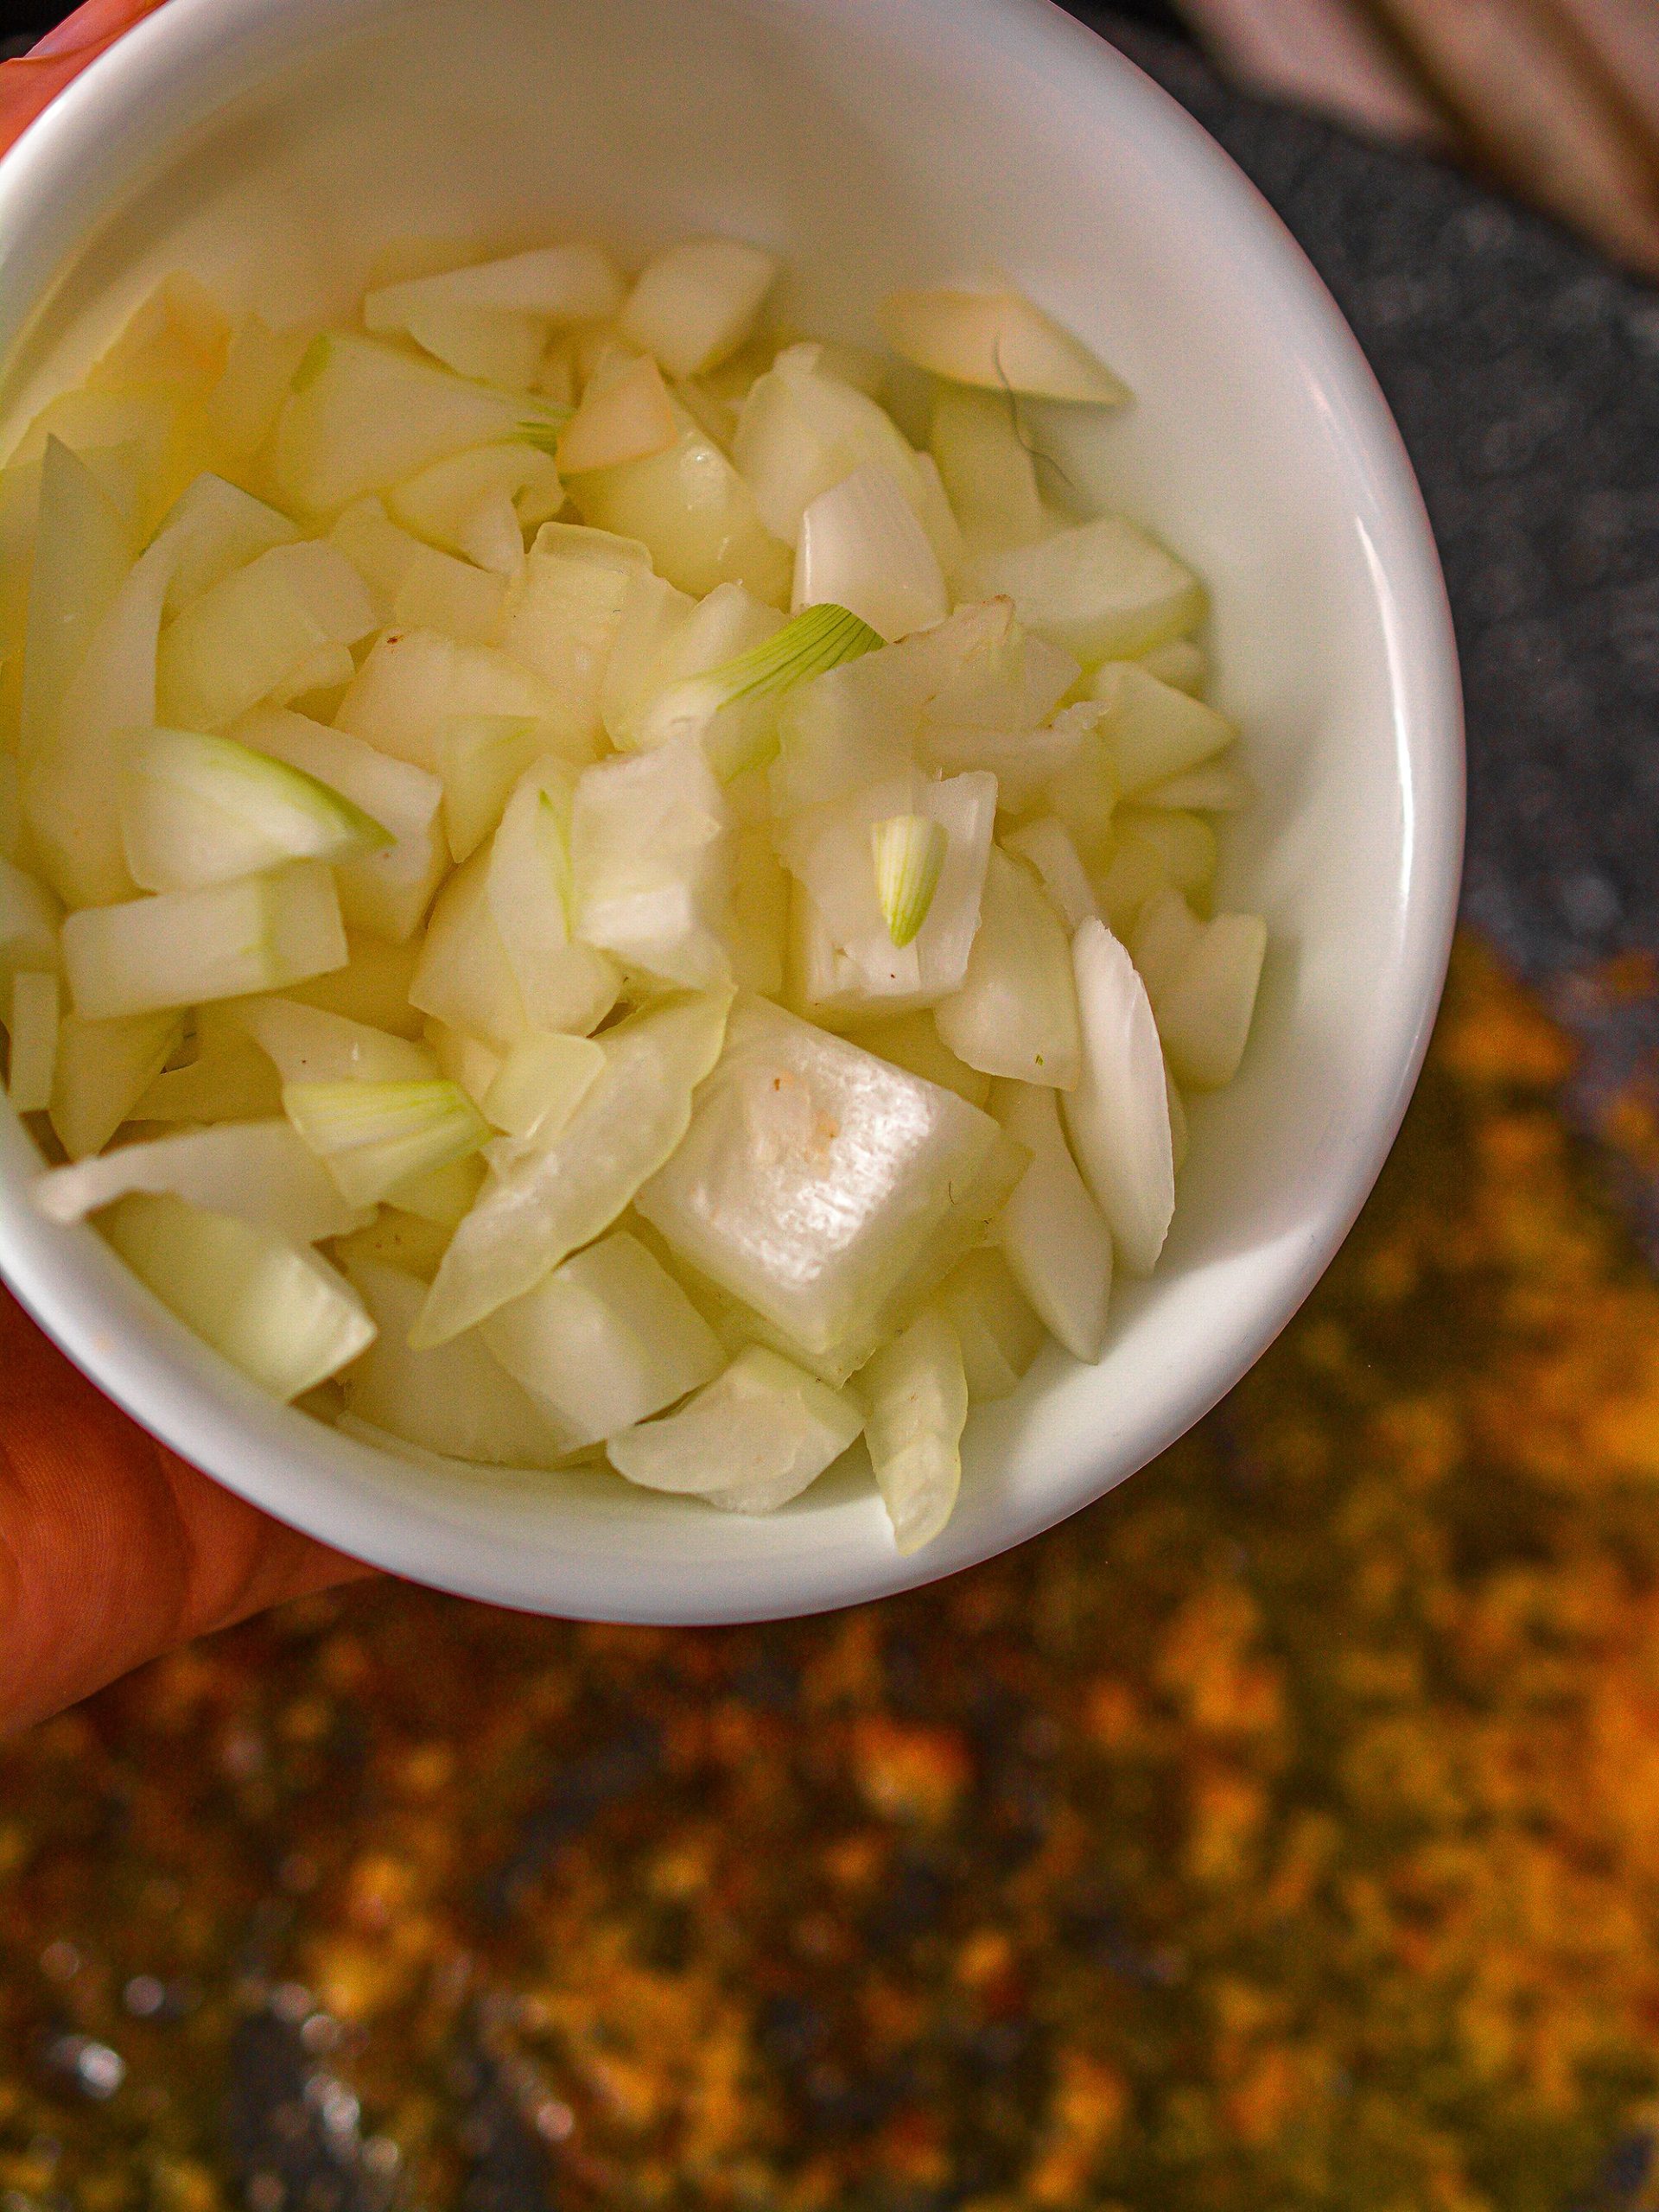 Mix the onions into the skillet, and saute until becoming tender.